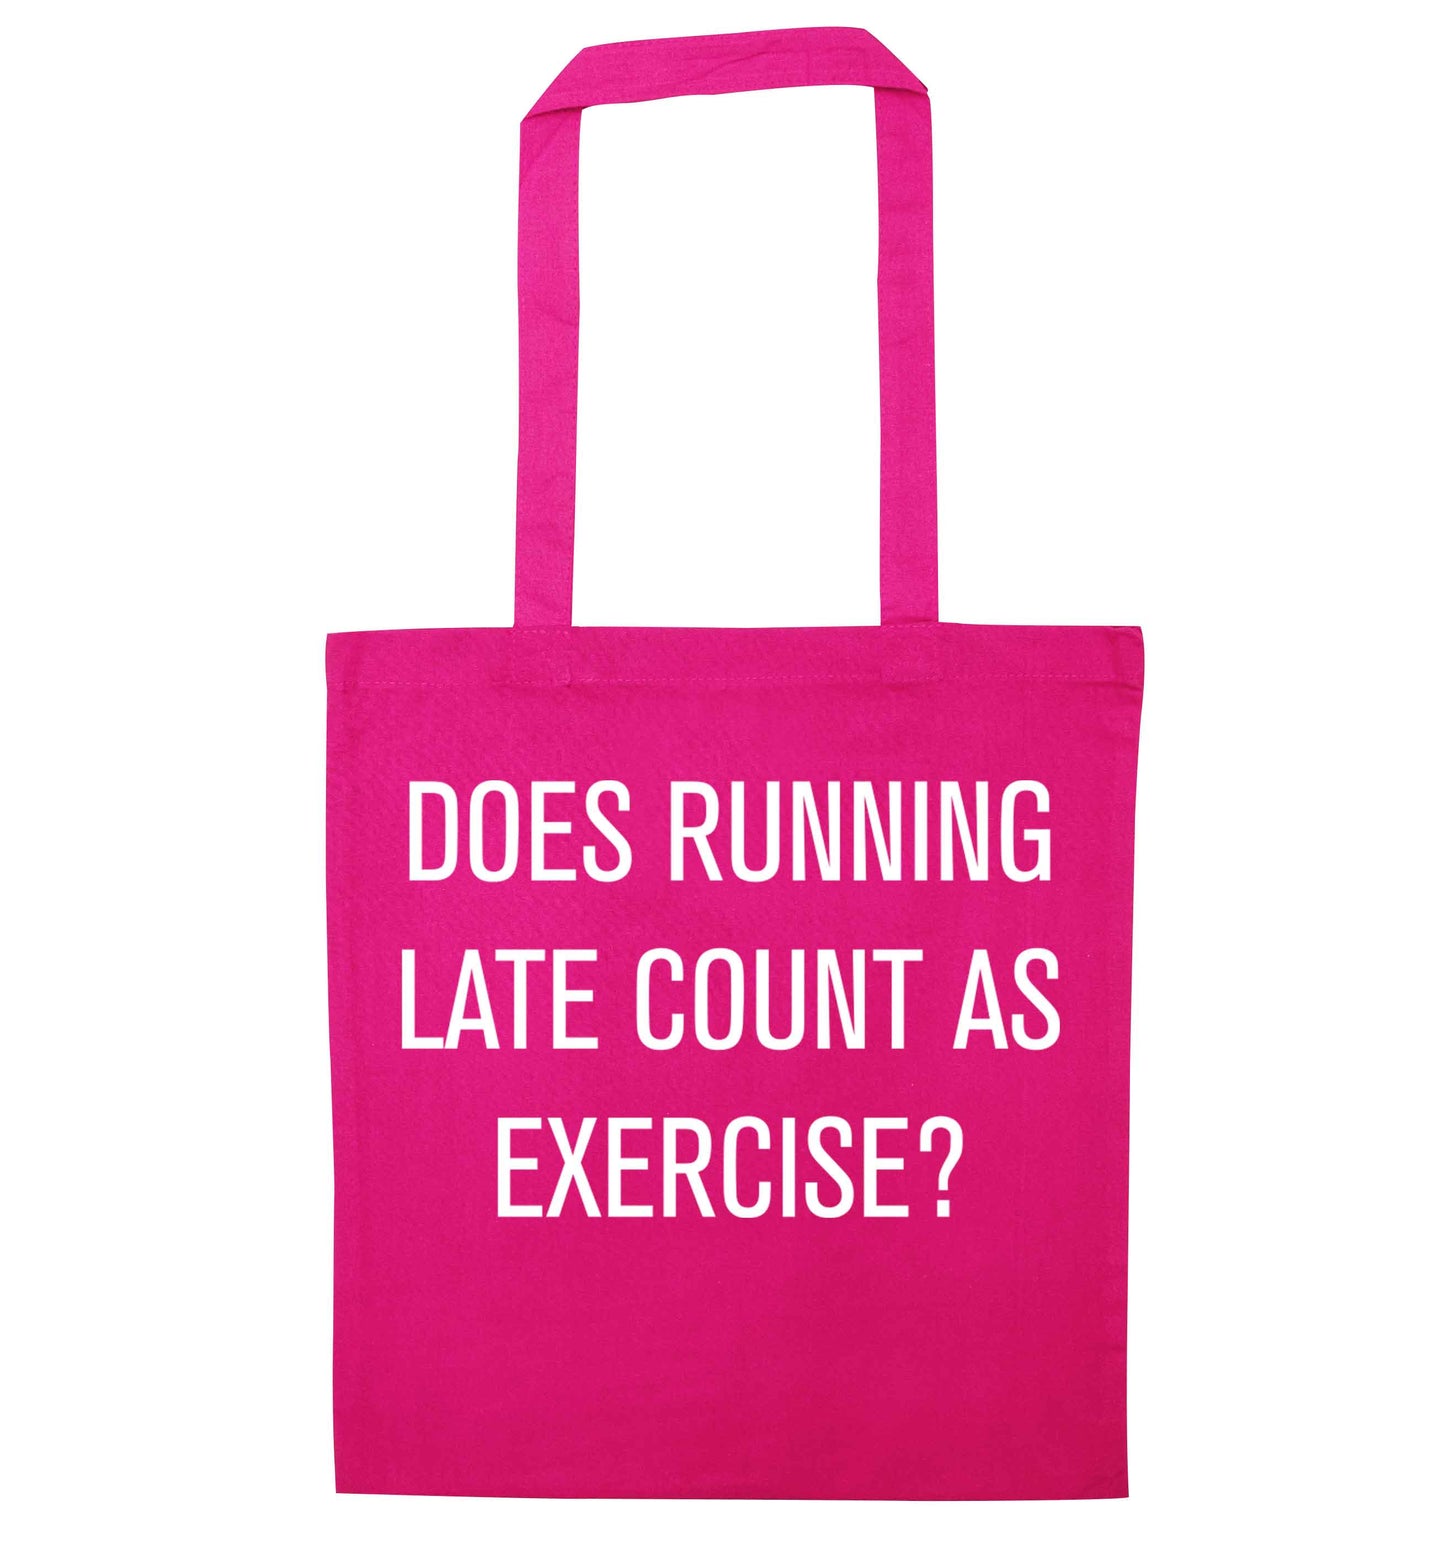 Does running late count as exercise? pink tote bag